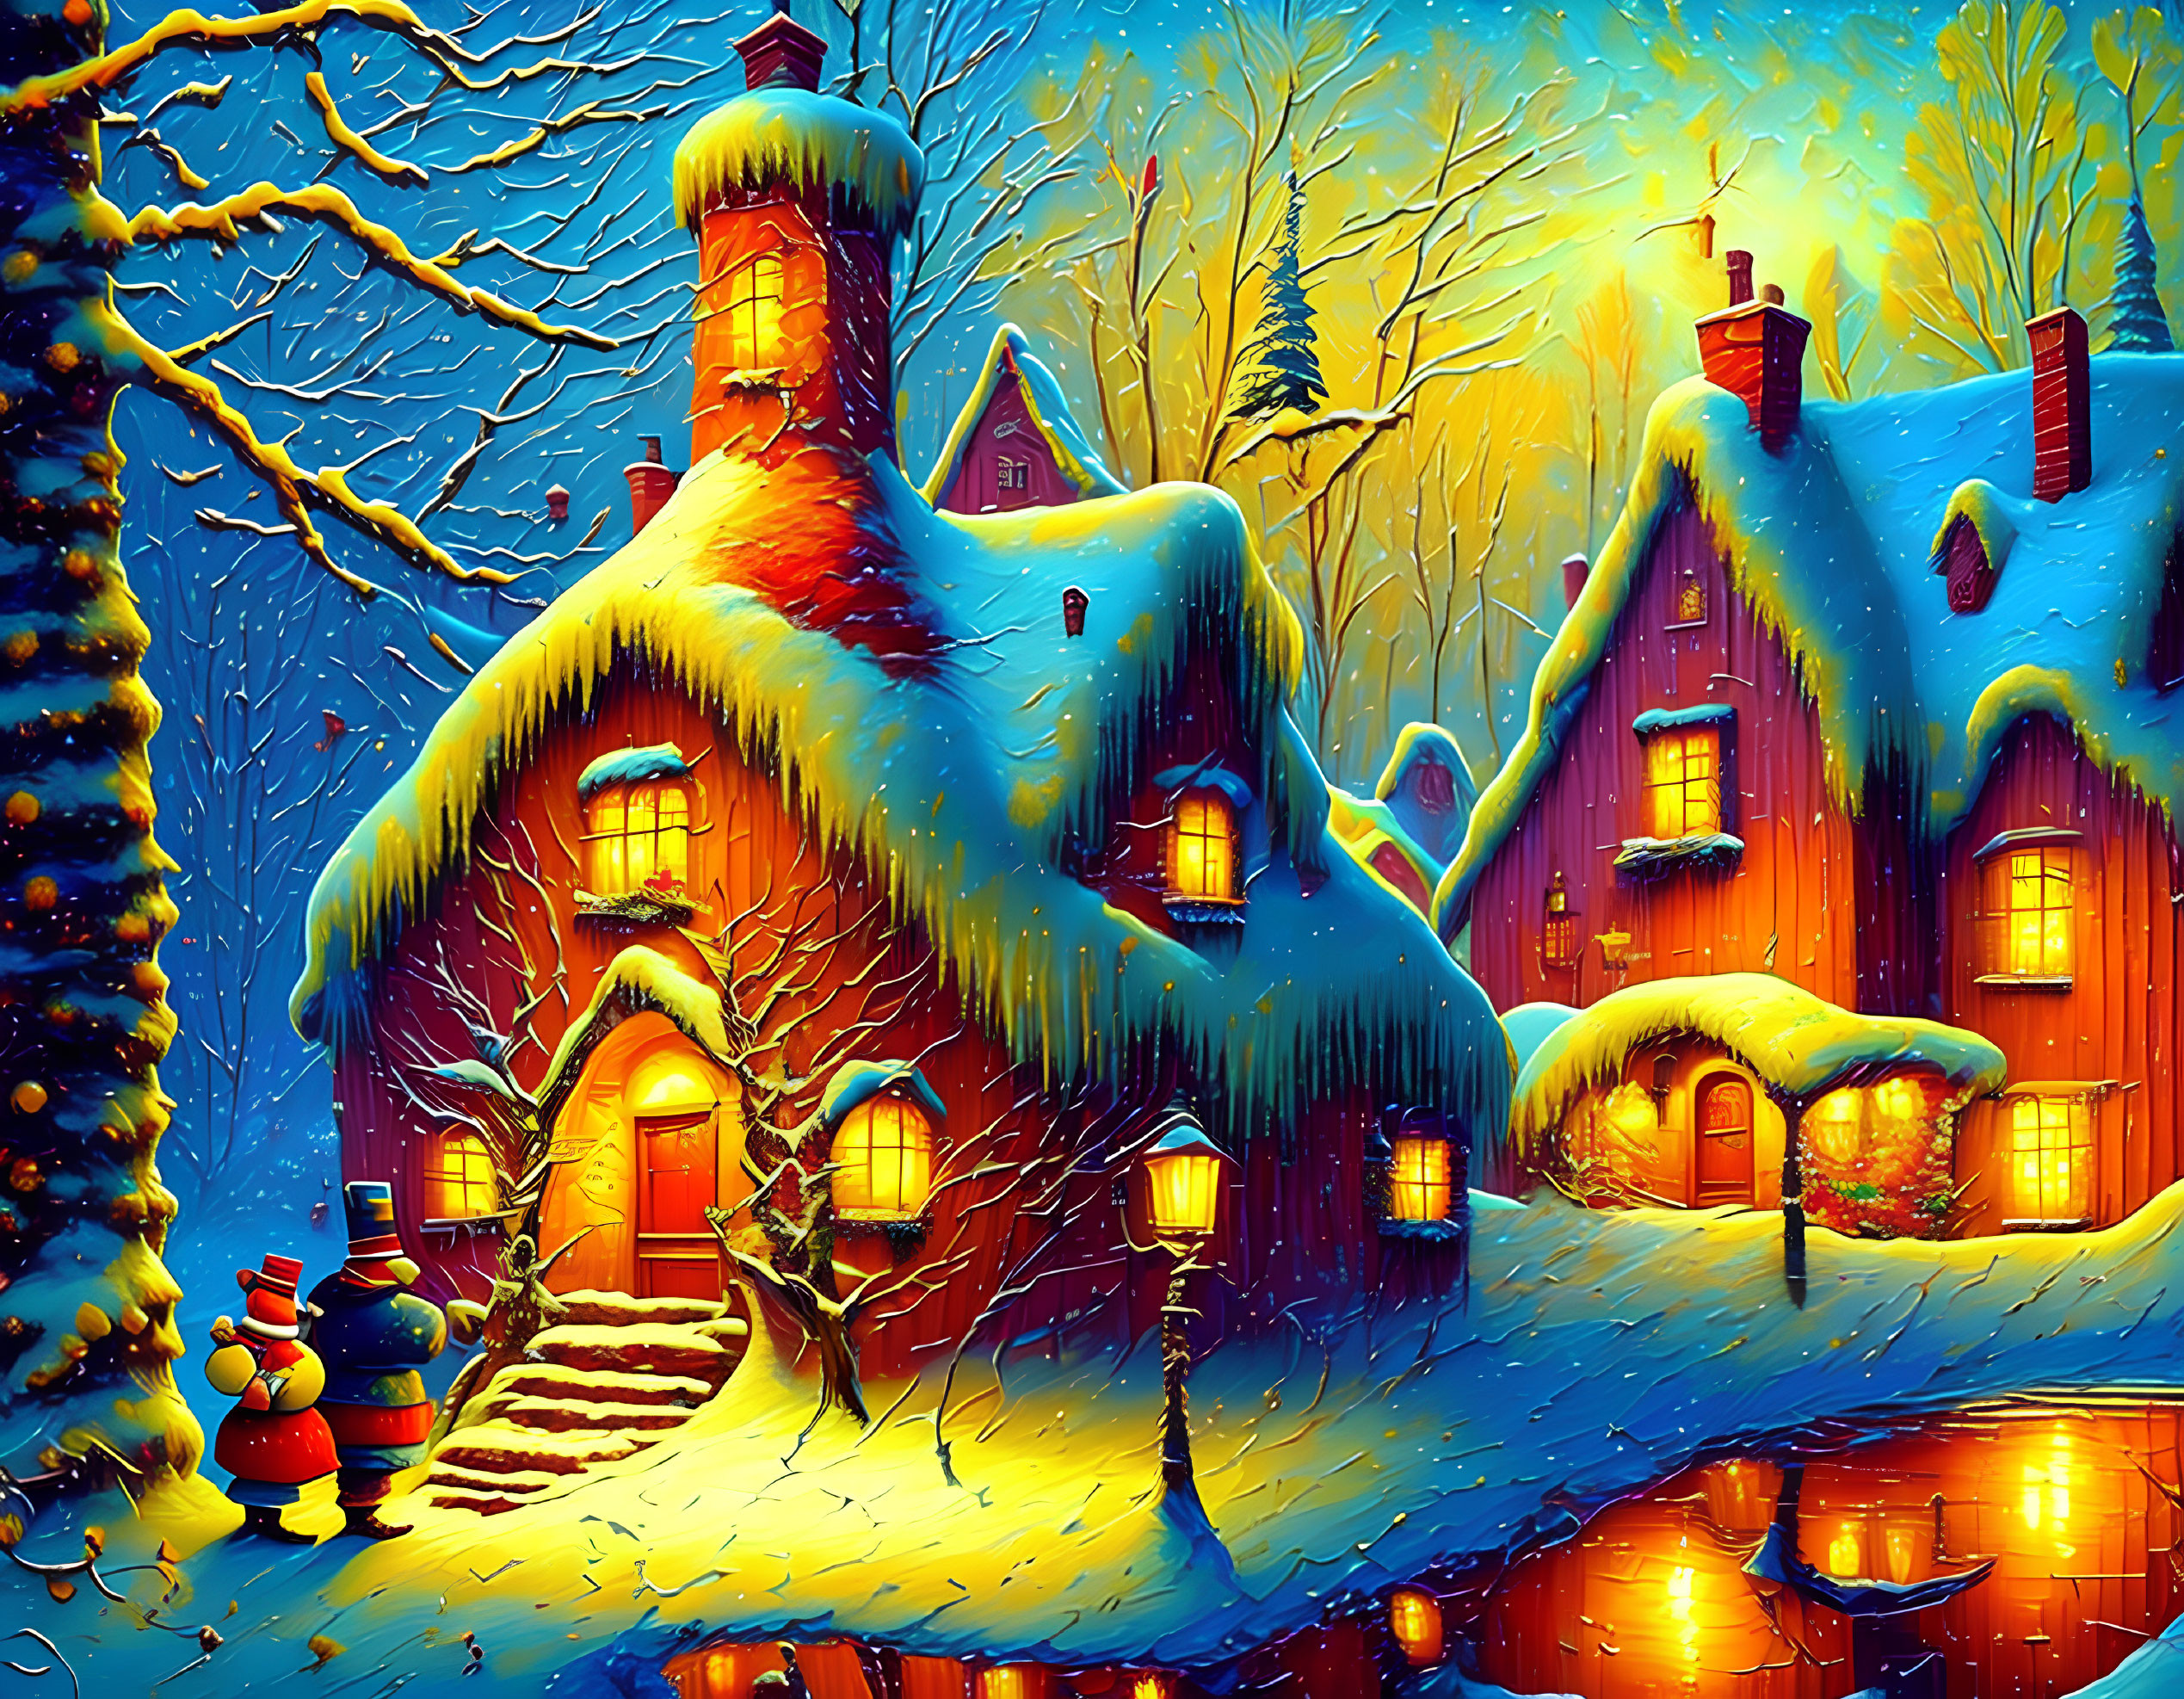 Winter Scene with Snow-Covered Cottages and Snowman in Twilight Sky